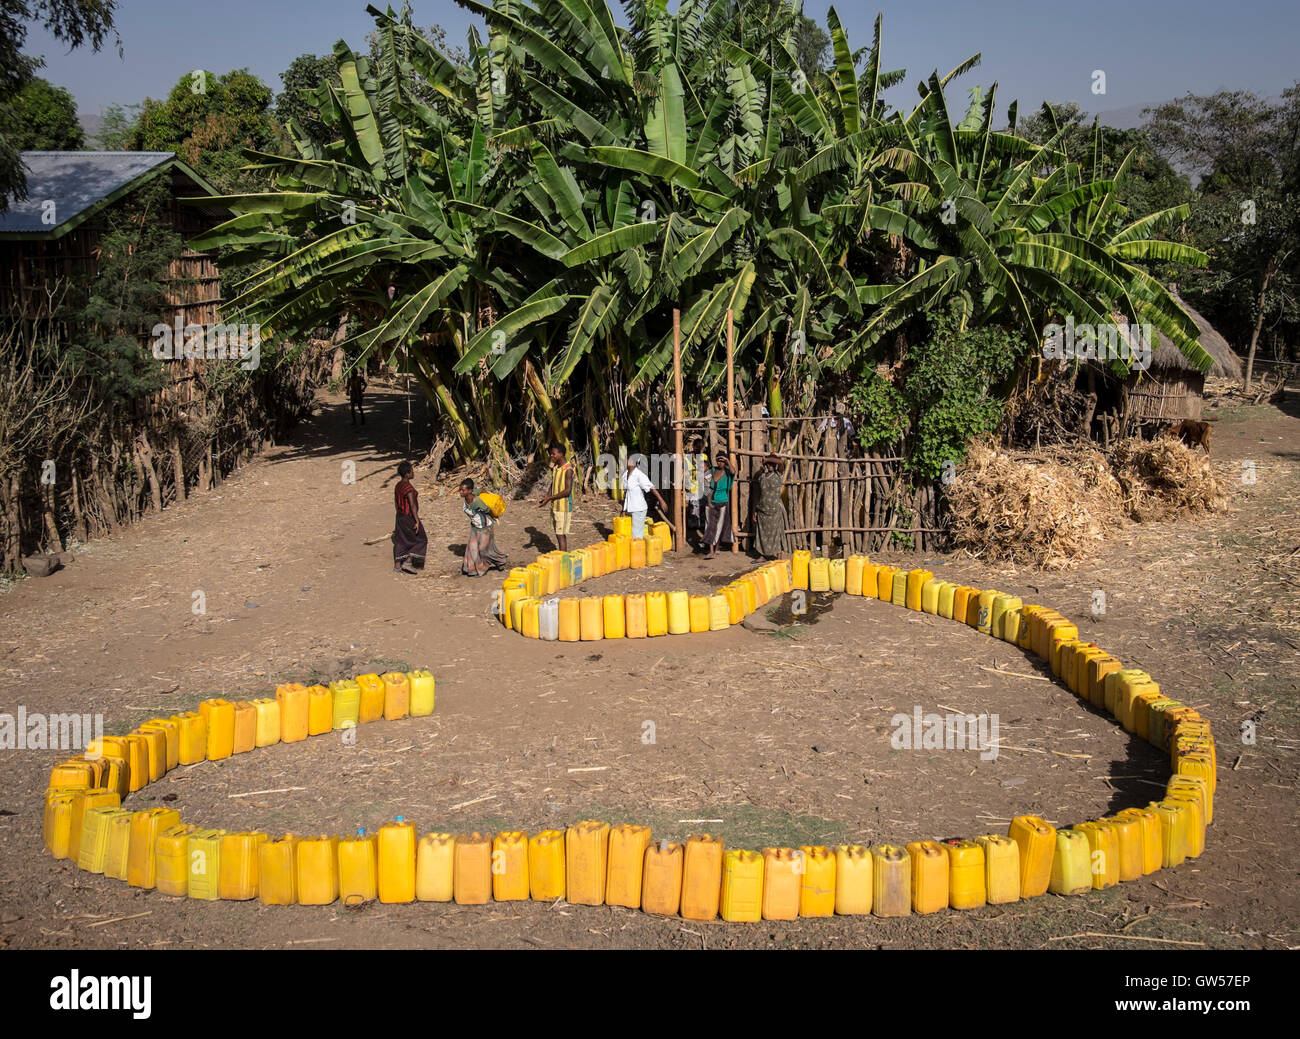 Villagers line up their water cans waiting for water from the village well in the Omo Valley of Ethiopia Stock Photo